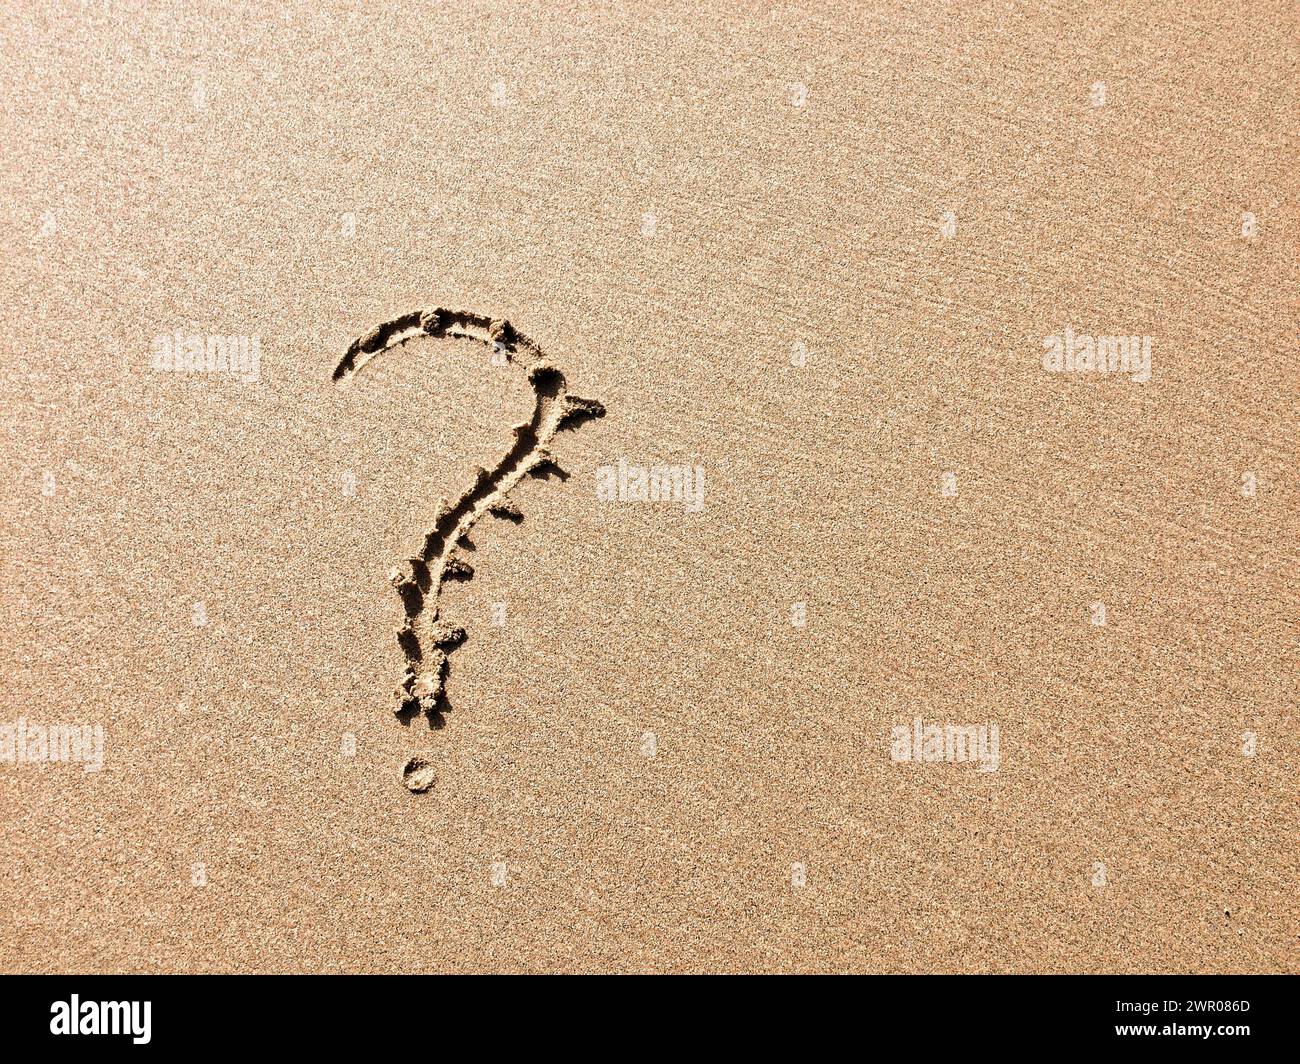 A sandy surface bears a clear question mark, indicating a query or doubt. Stock Photo